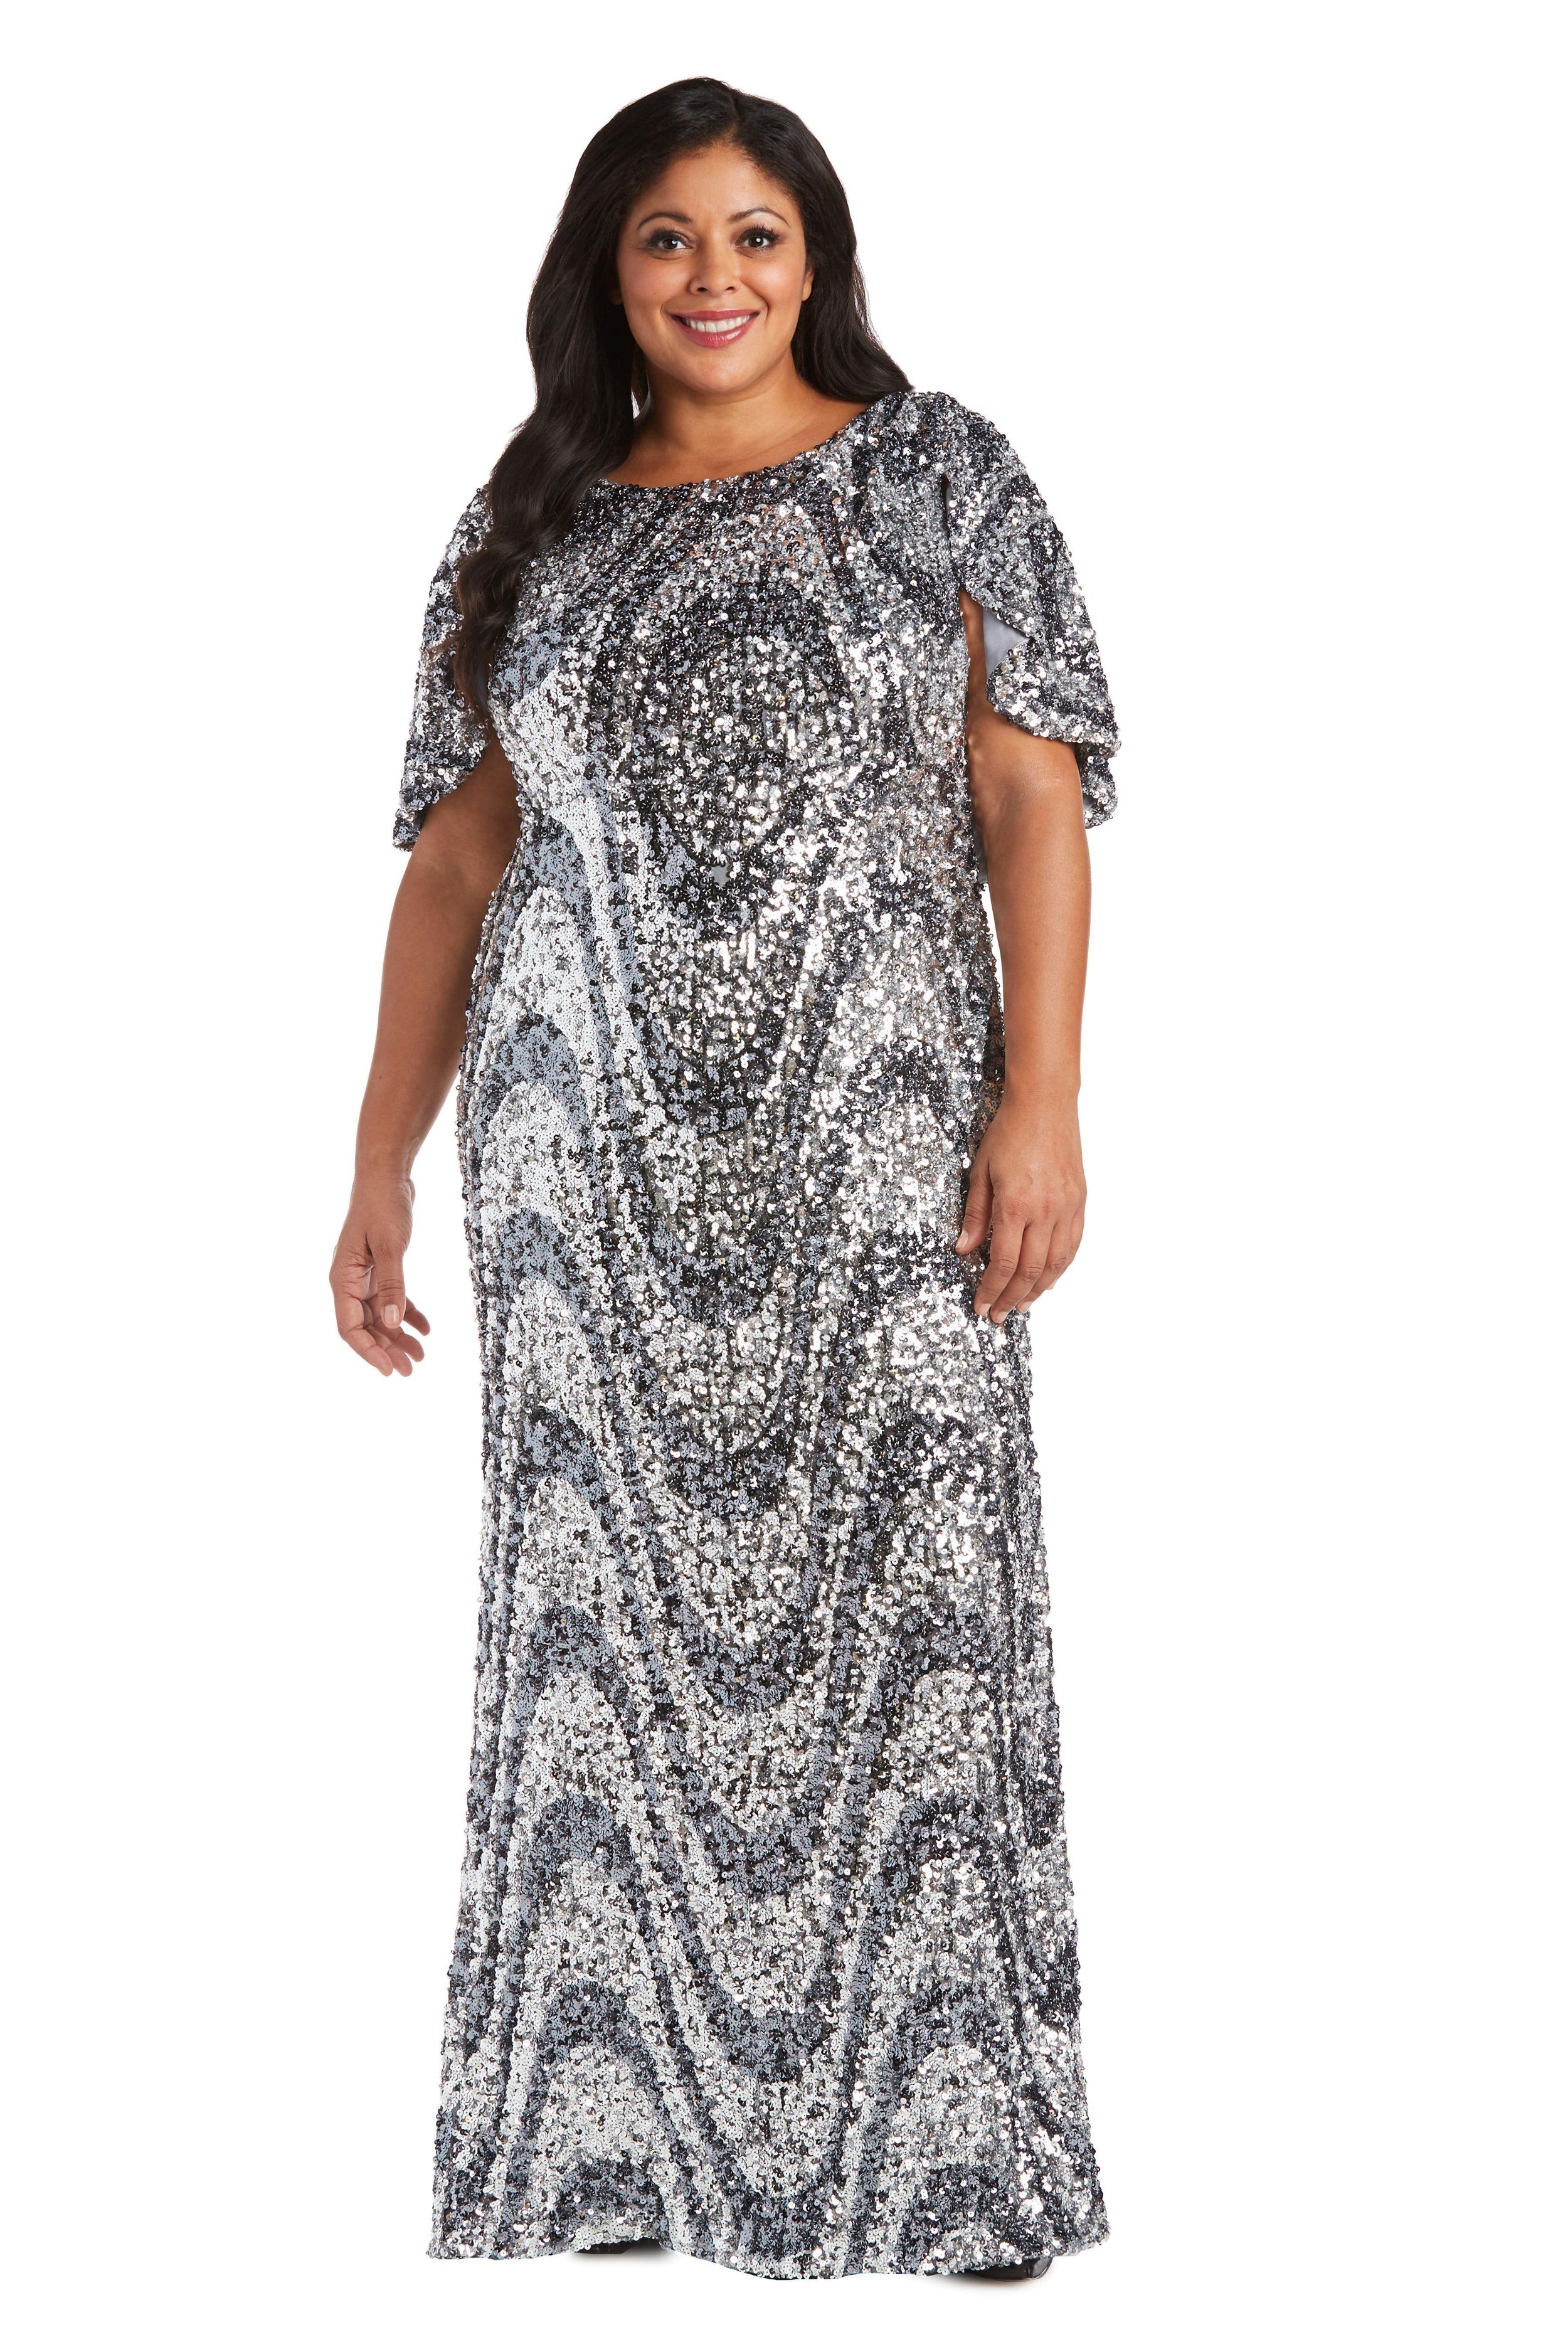 R&M Richards Long Mother of the Bride Plus Size Dress 7510W - The Dress Outlet